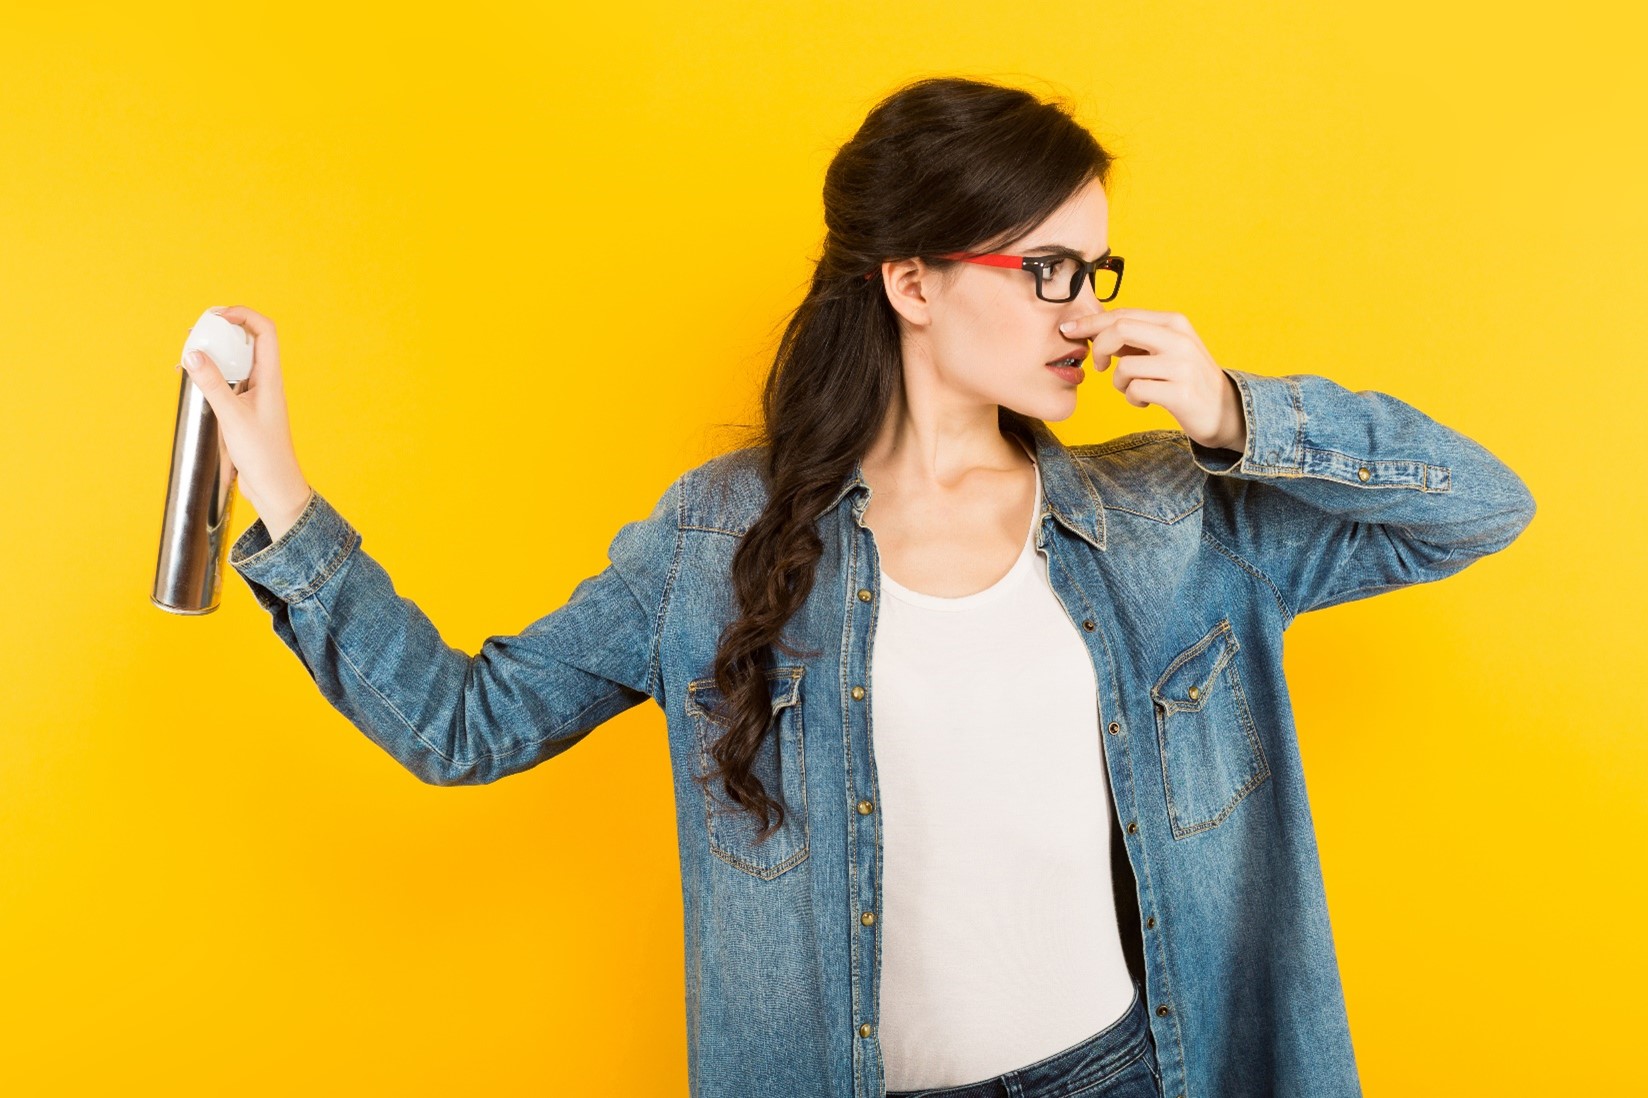 A woman wearing a denim jacket, holding her nose while spraying an air freshener in front of a yellow background.